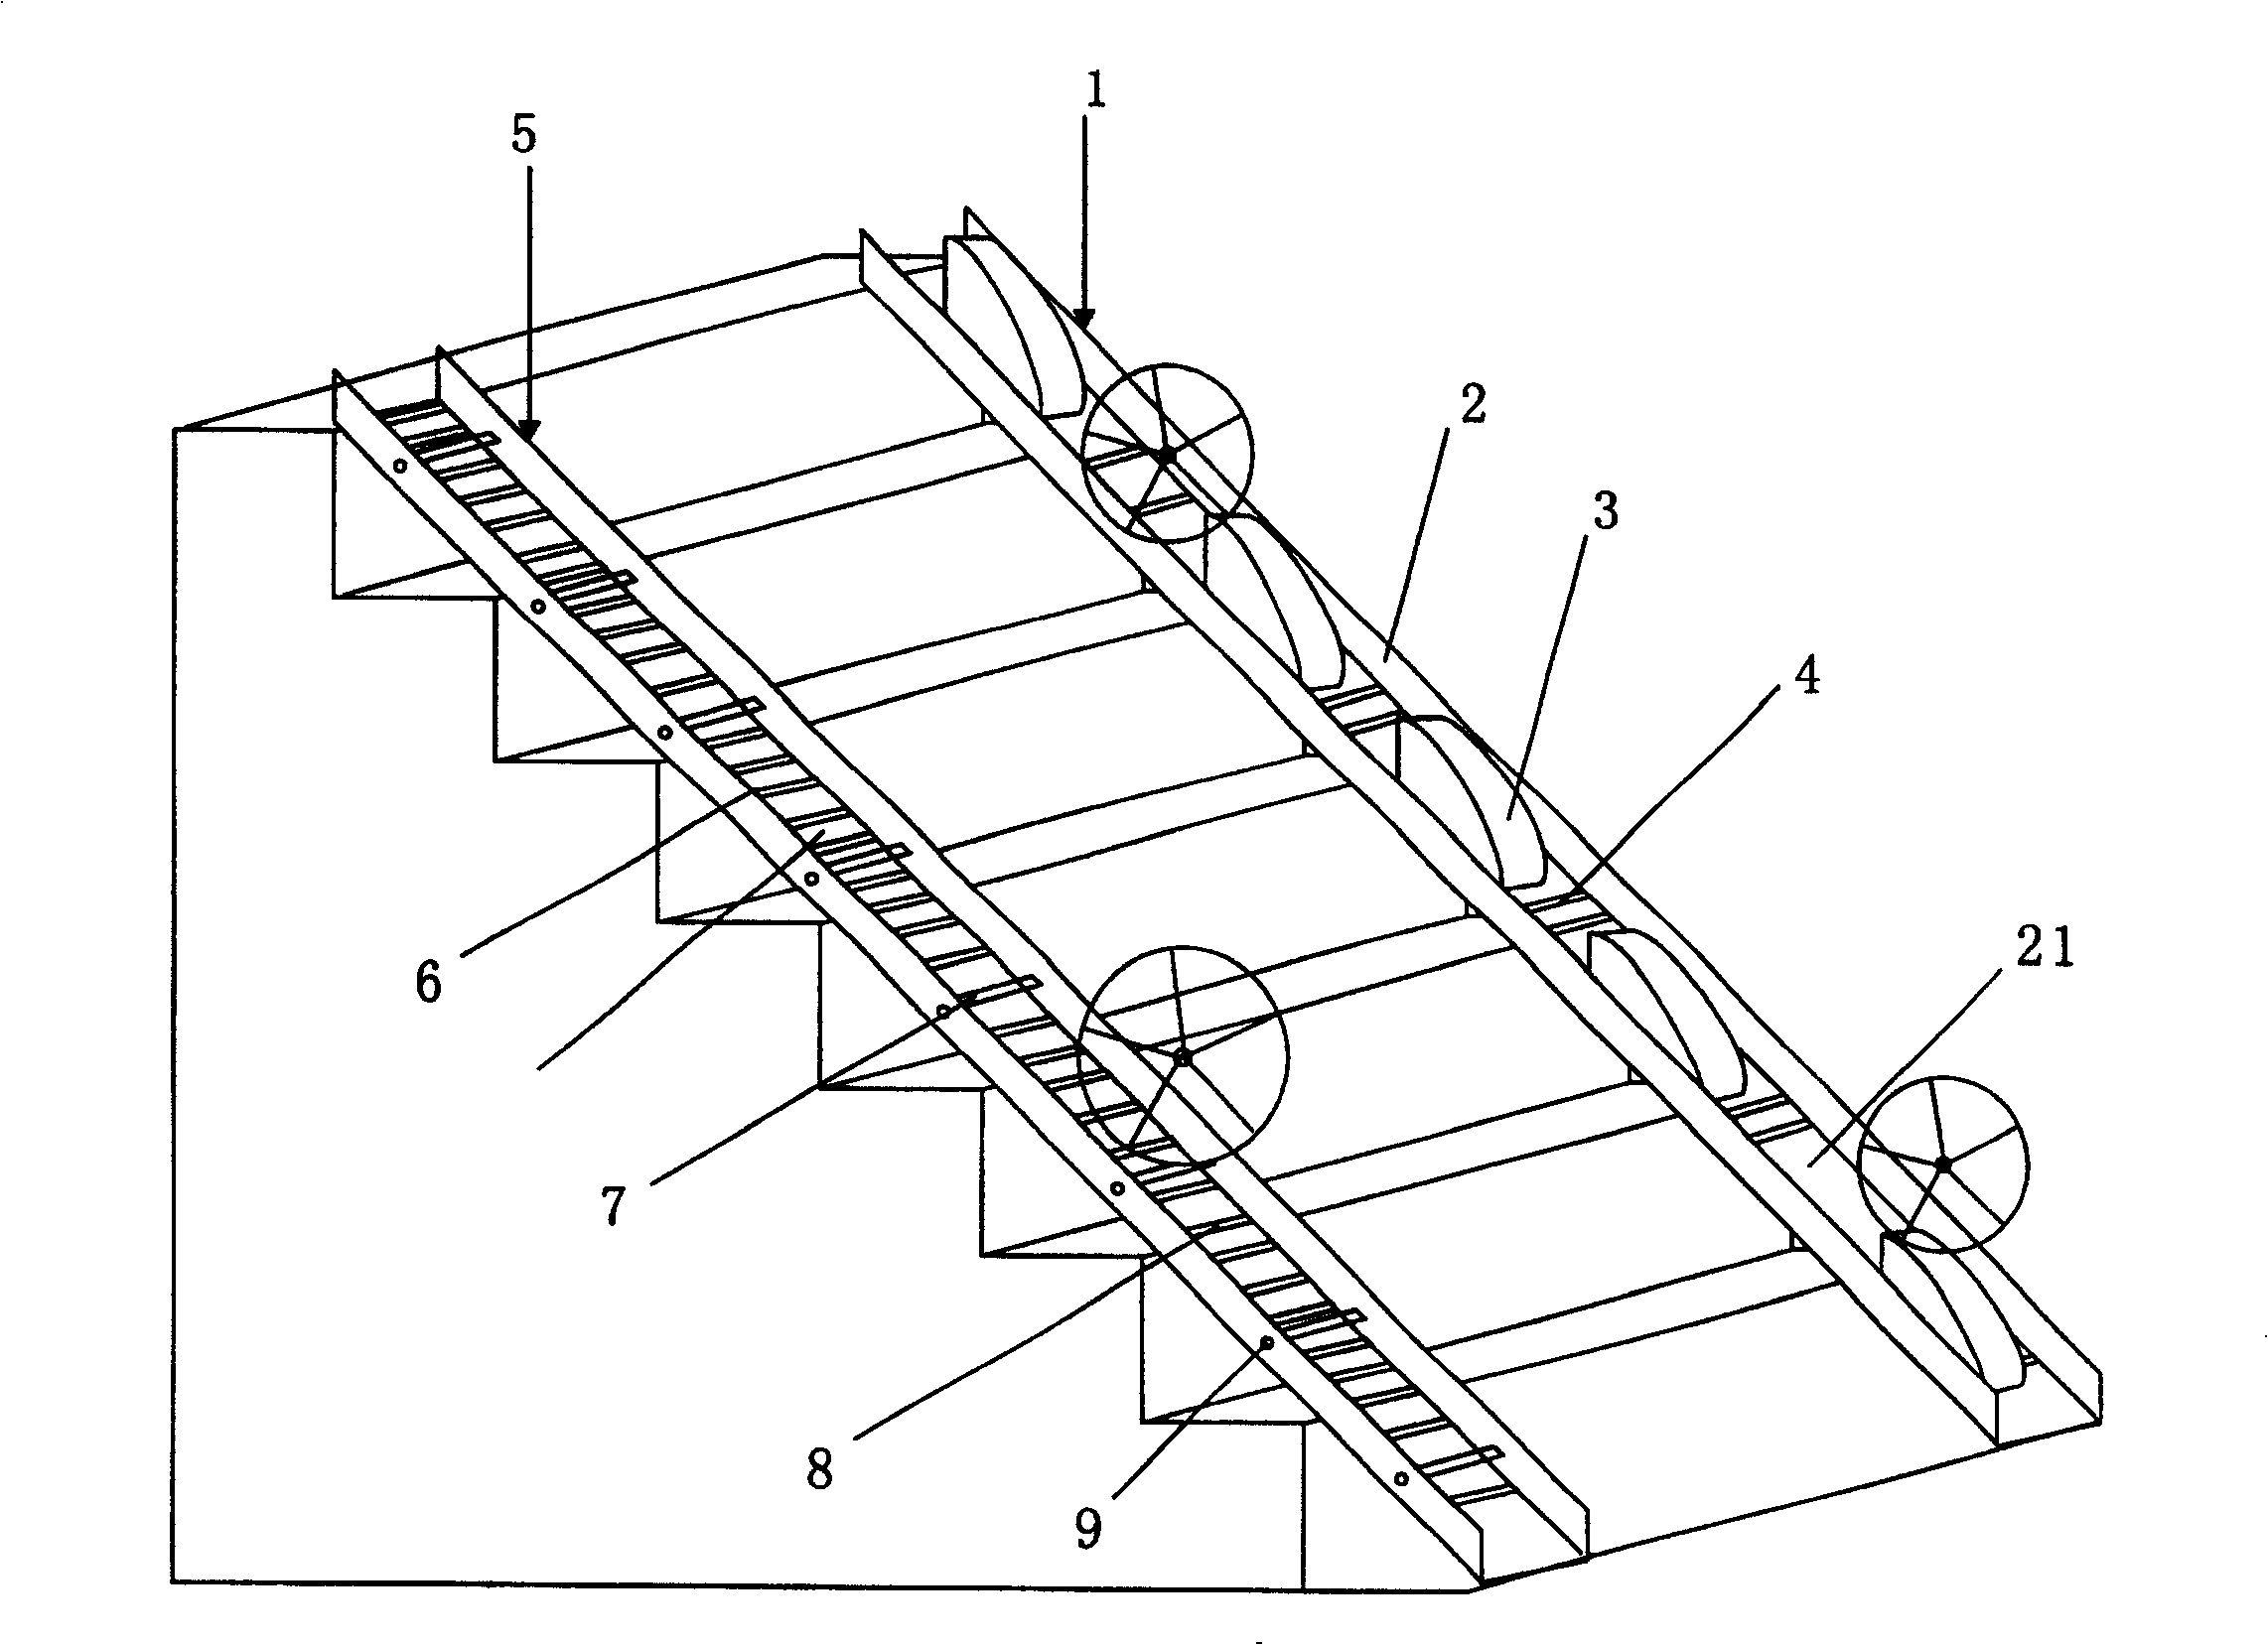 Work saving device for object to go up or down steps of staircase